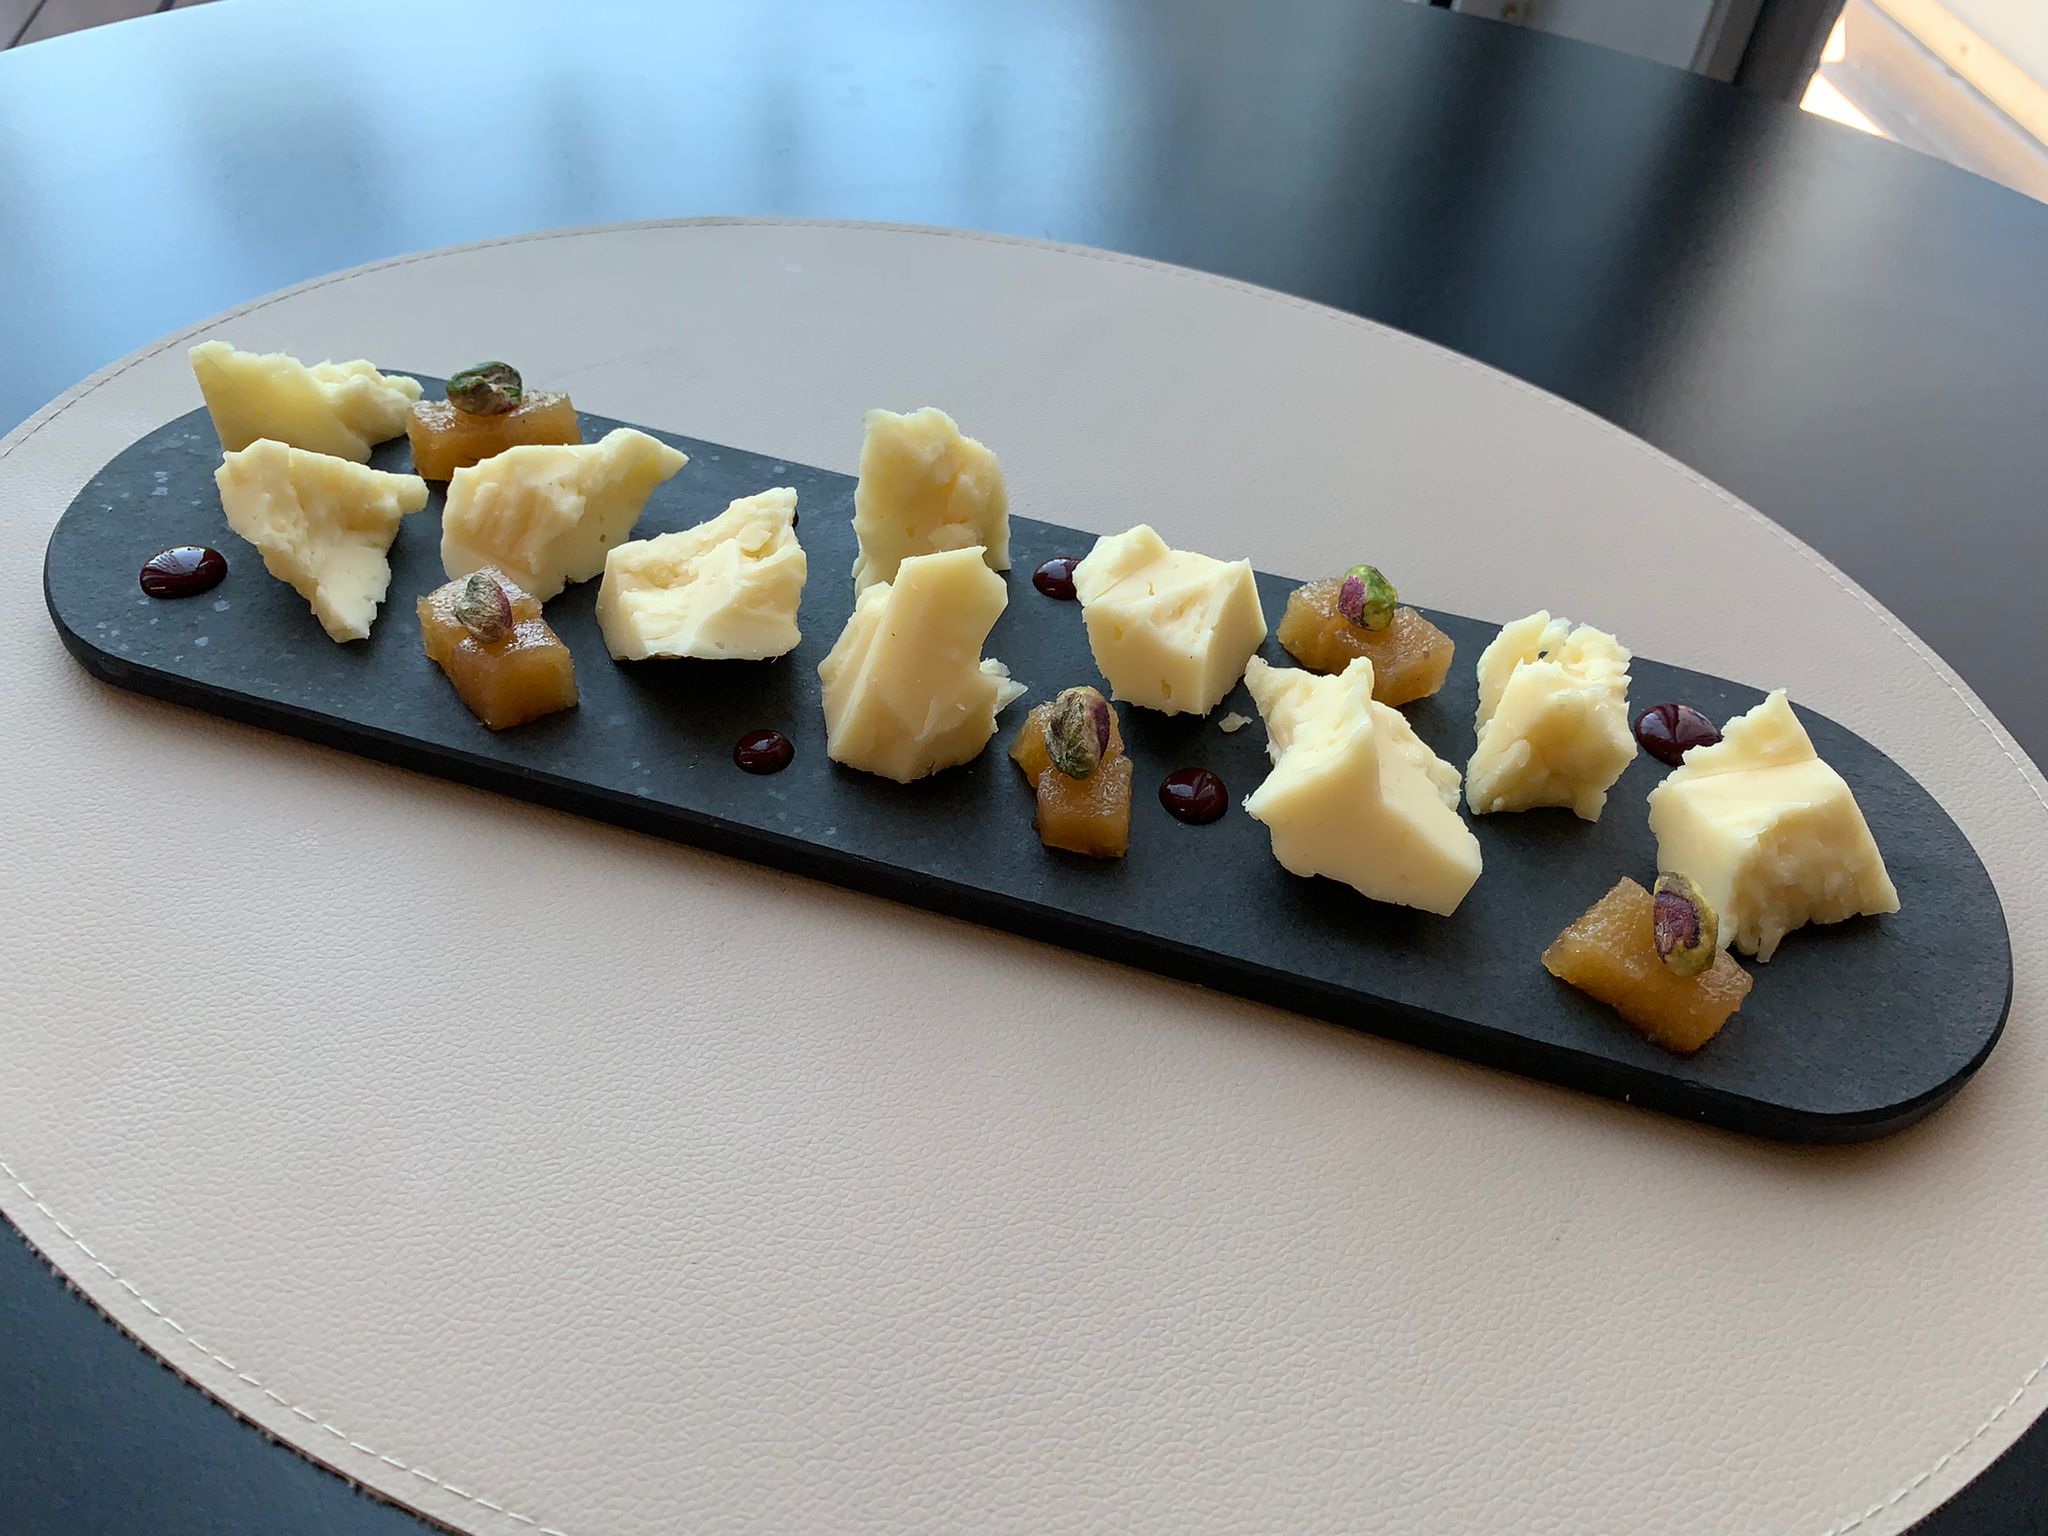 Chunks of cheese with quince and raspberry jam